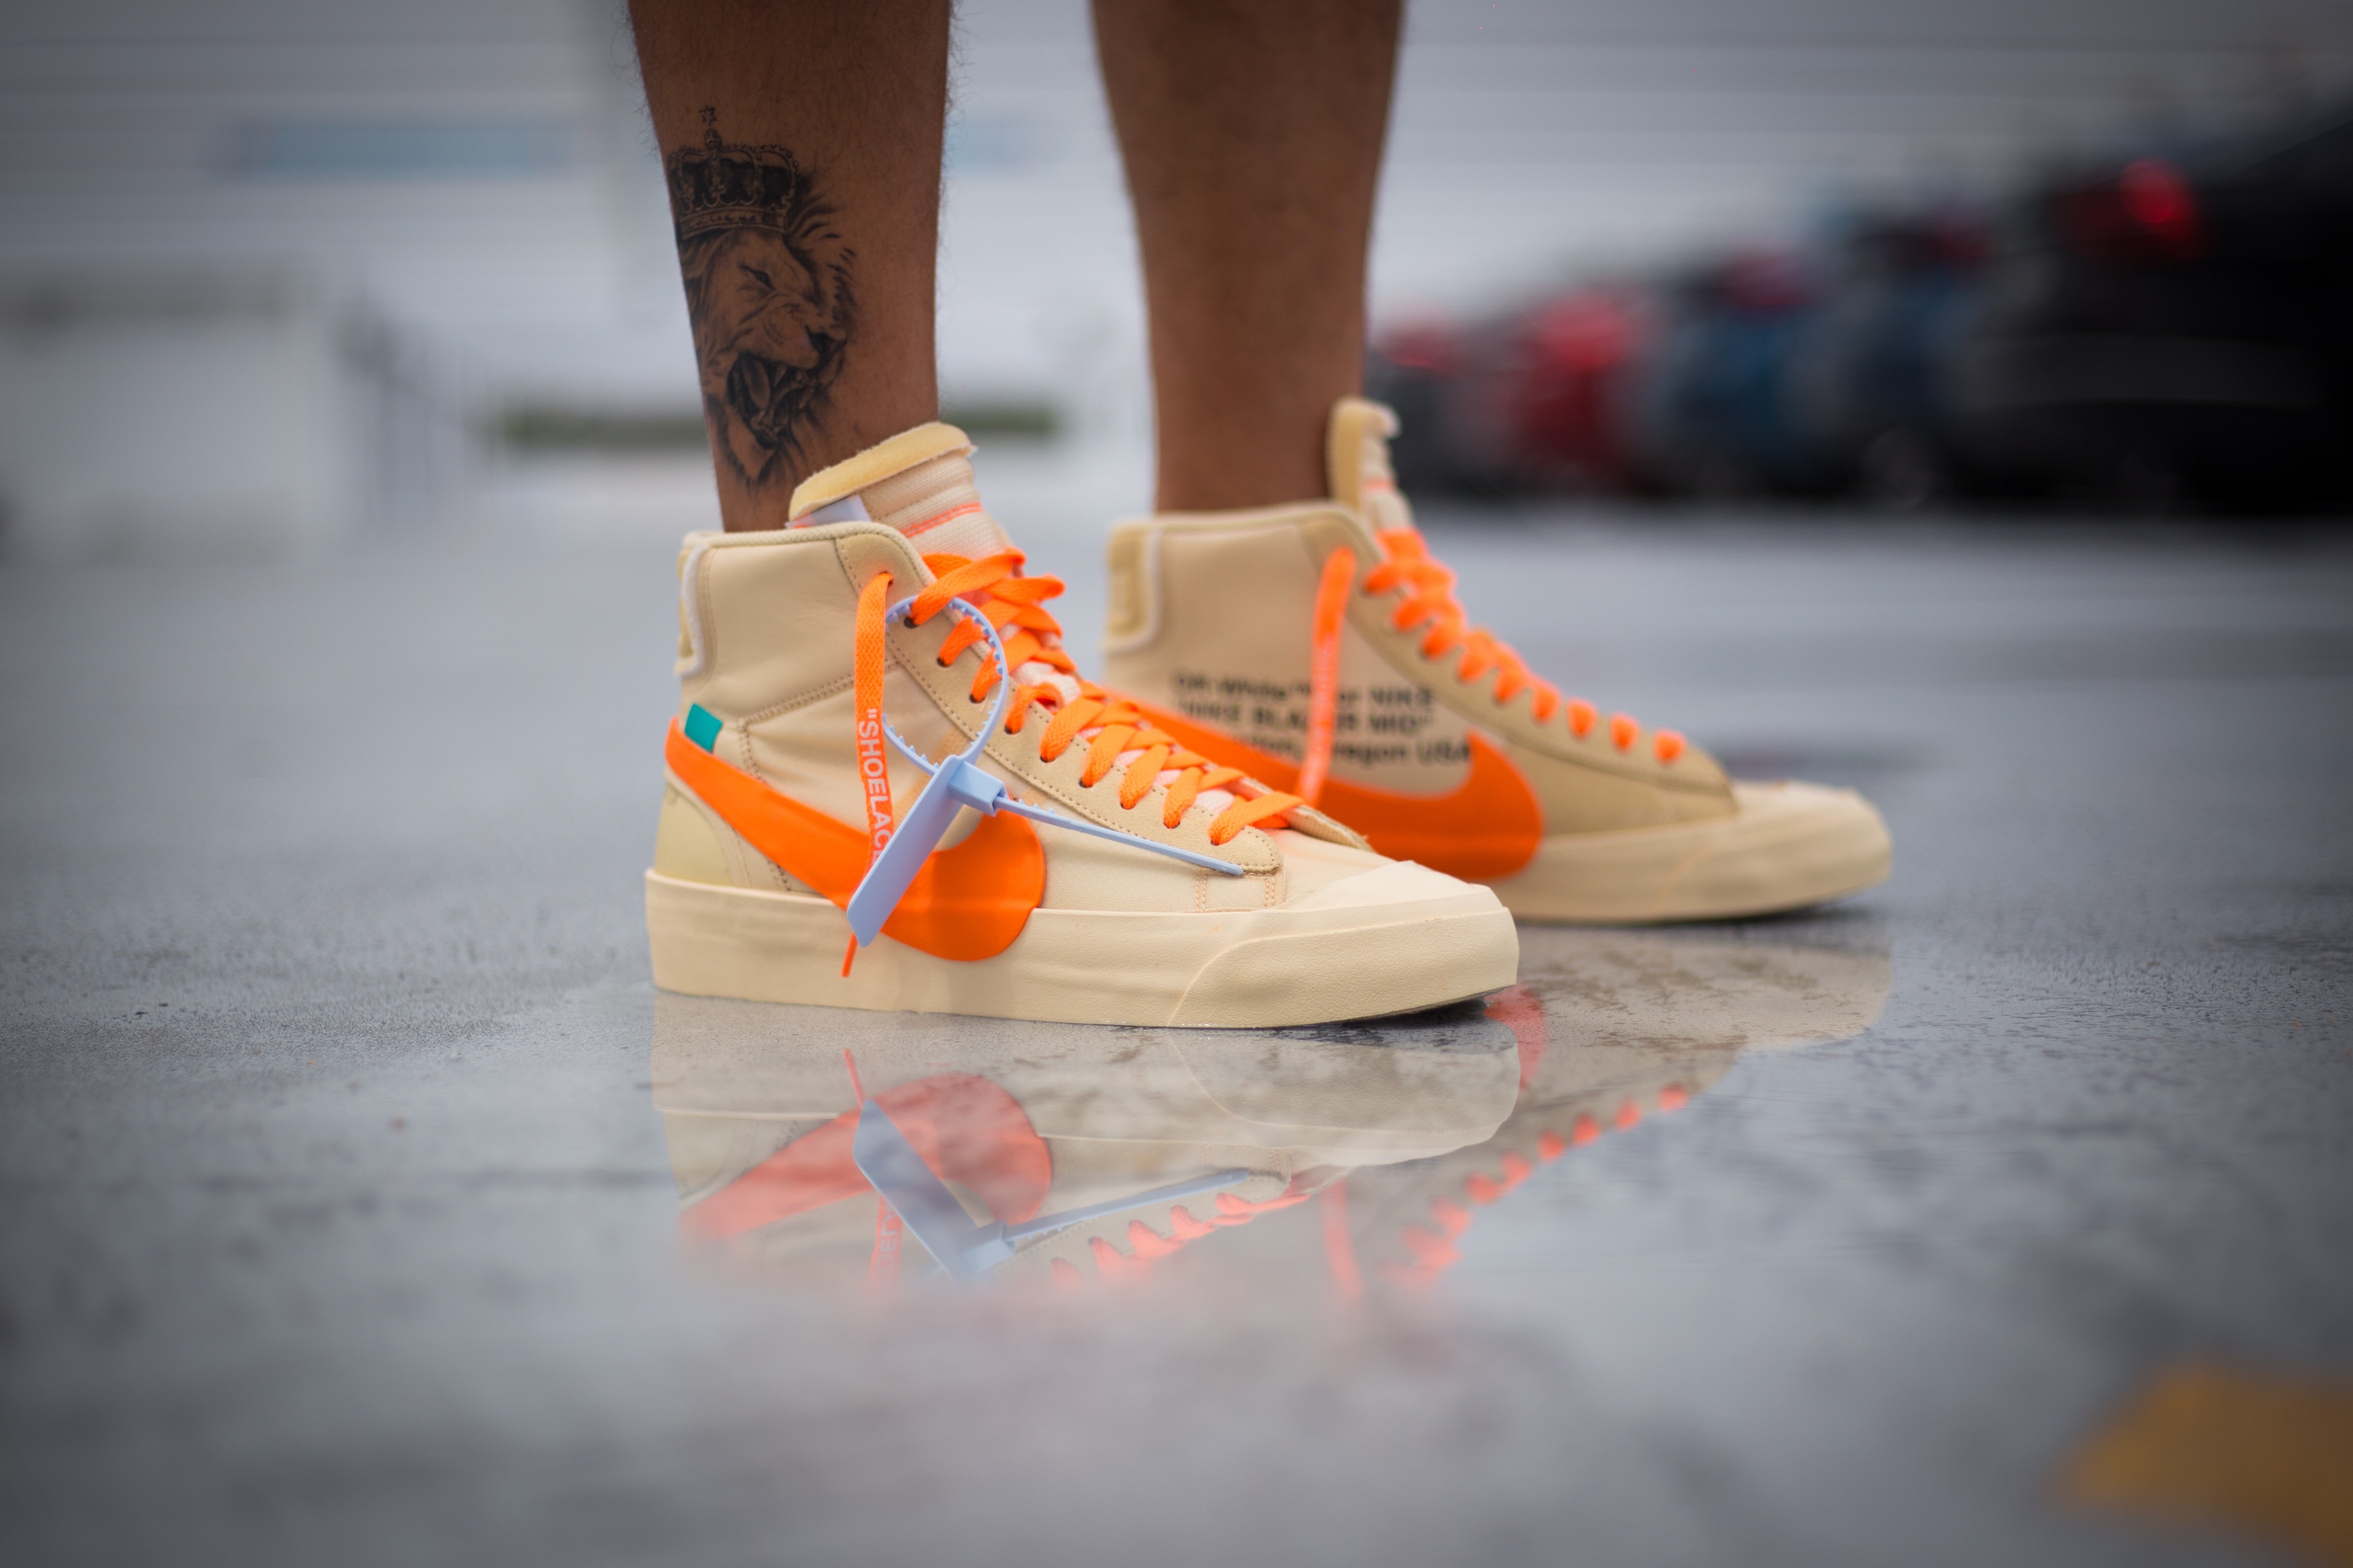 Off-White™ Nike Blazer All Hallow's Eve Foot | Hypebeast